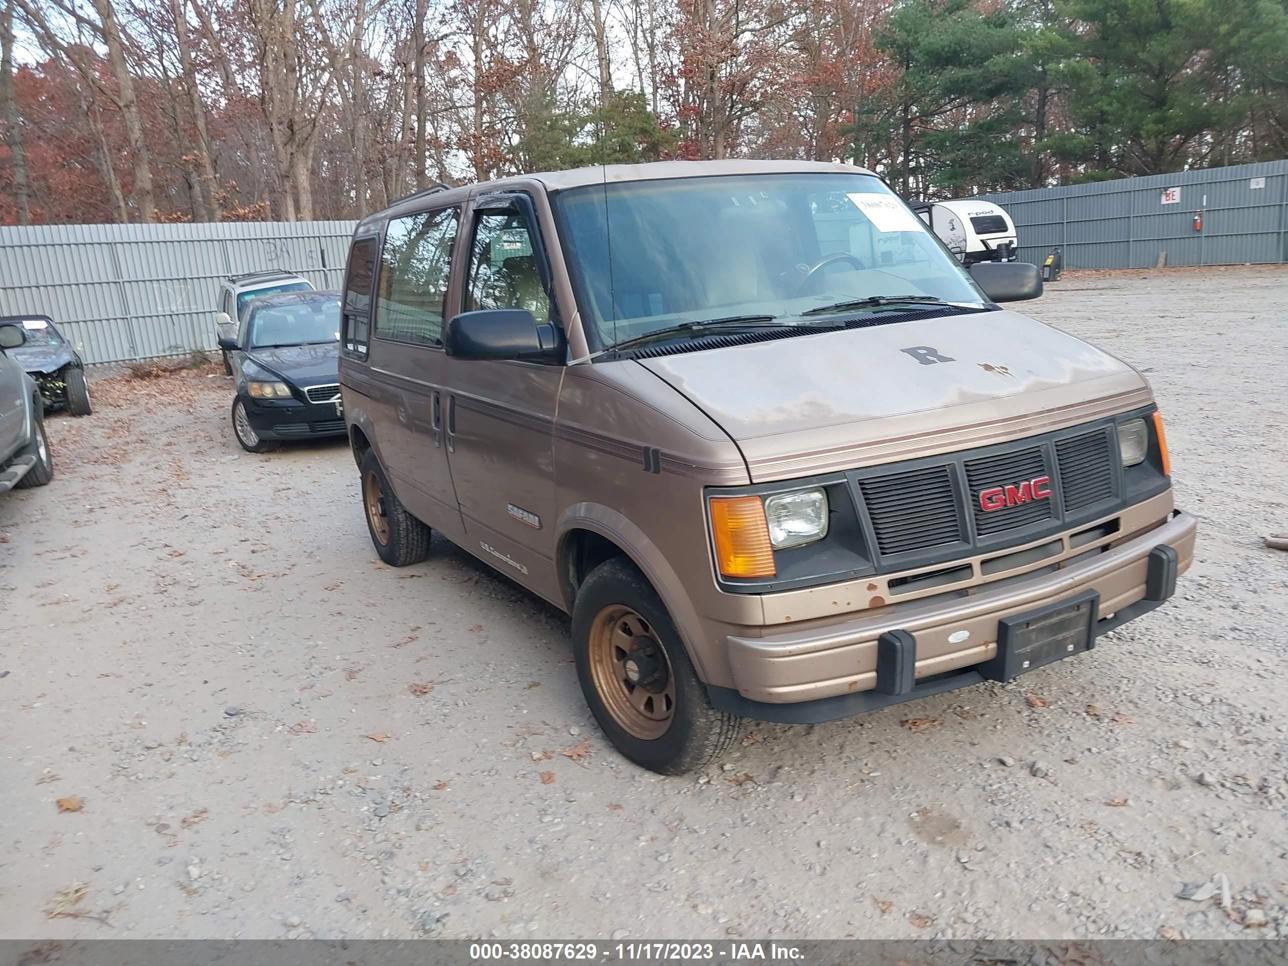 vin: 1GDDM15Z5RB510375 1GDDM15Z5RB510375 1994 gmc safari 4300 for Sale in 07751, 426 Texas Road, Morganville, USA